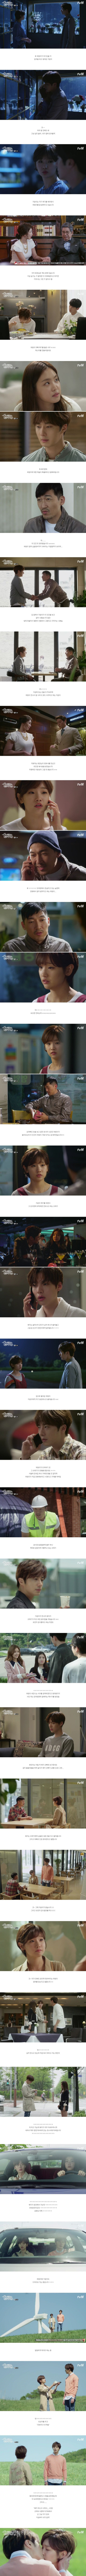 episodes 11 and 12 captures for the Korean drama 'Cinderella and the Four Knights'